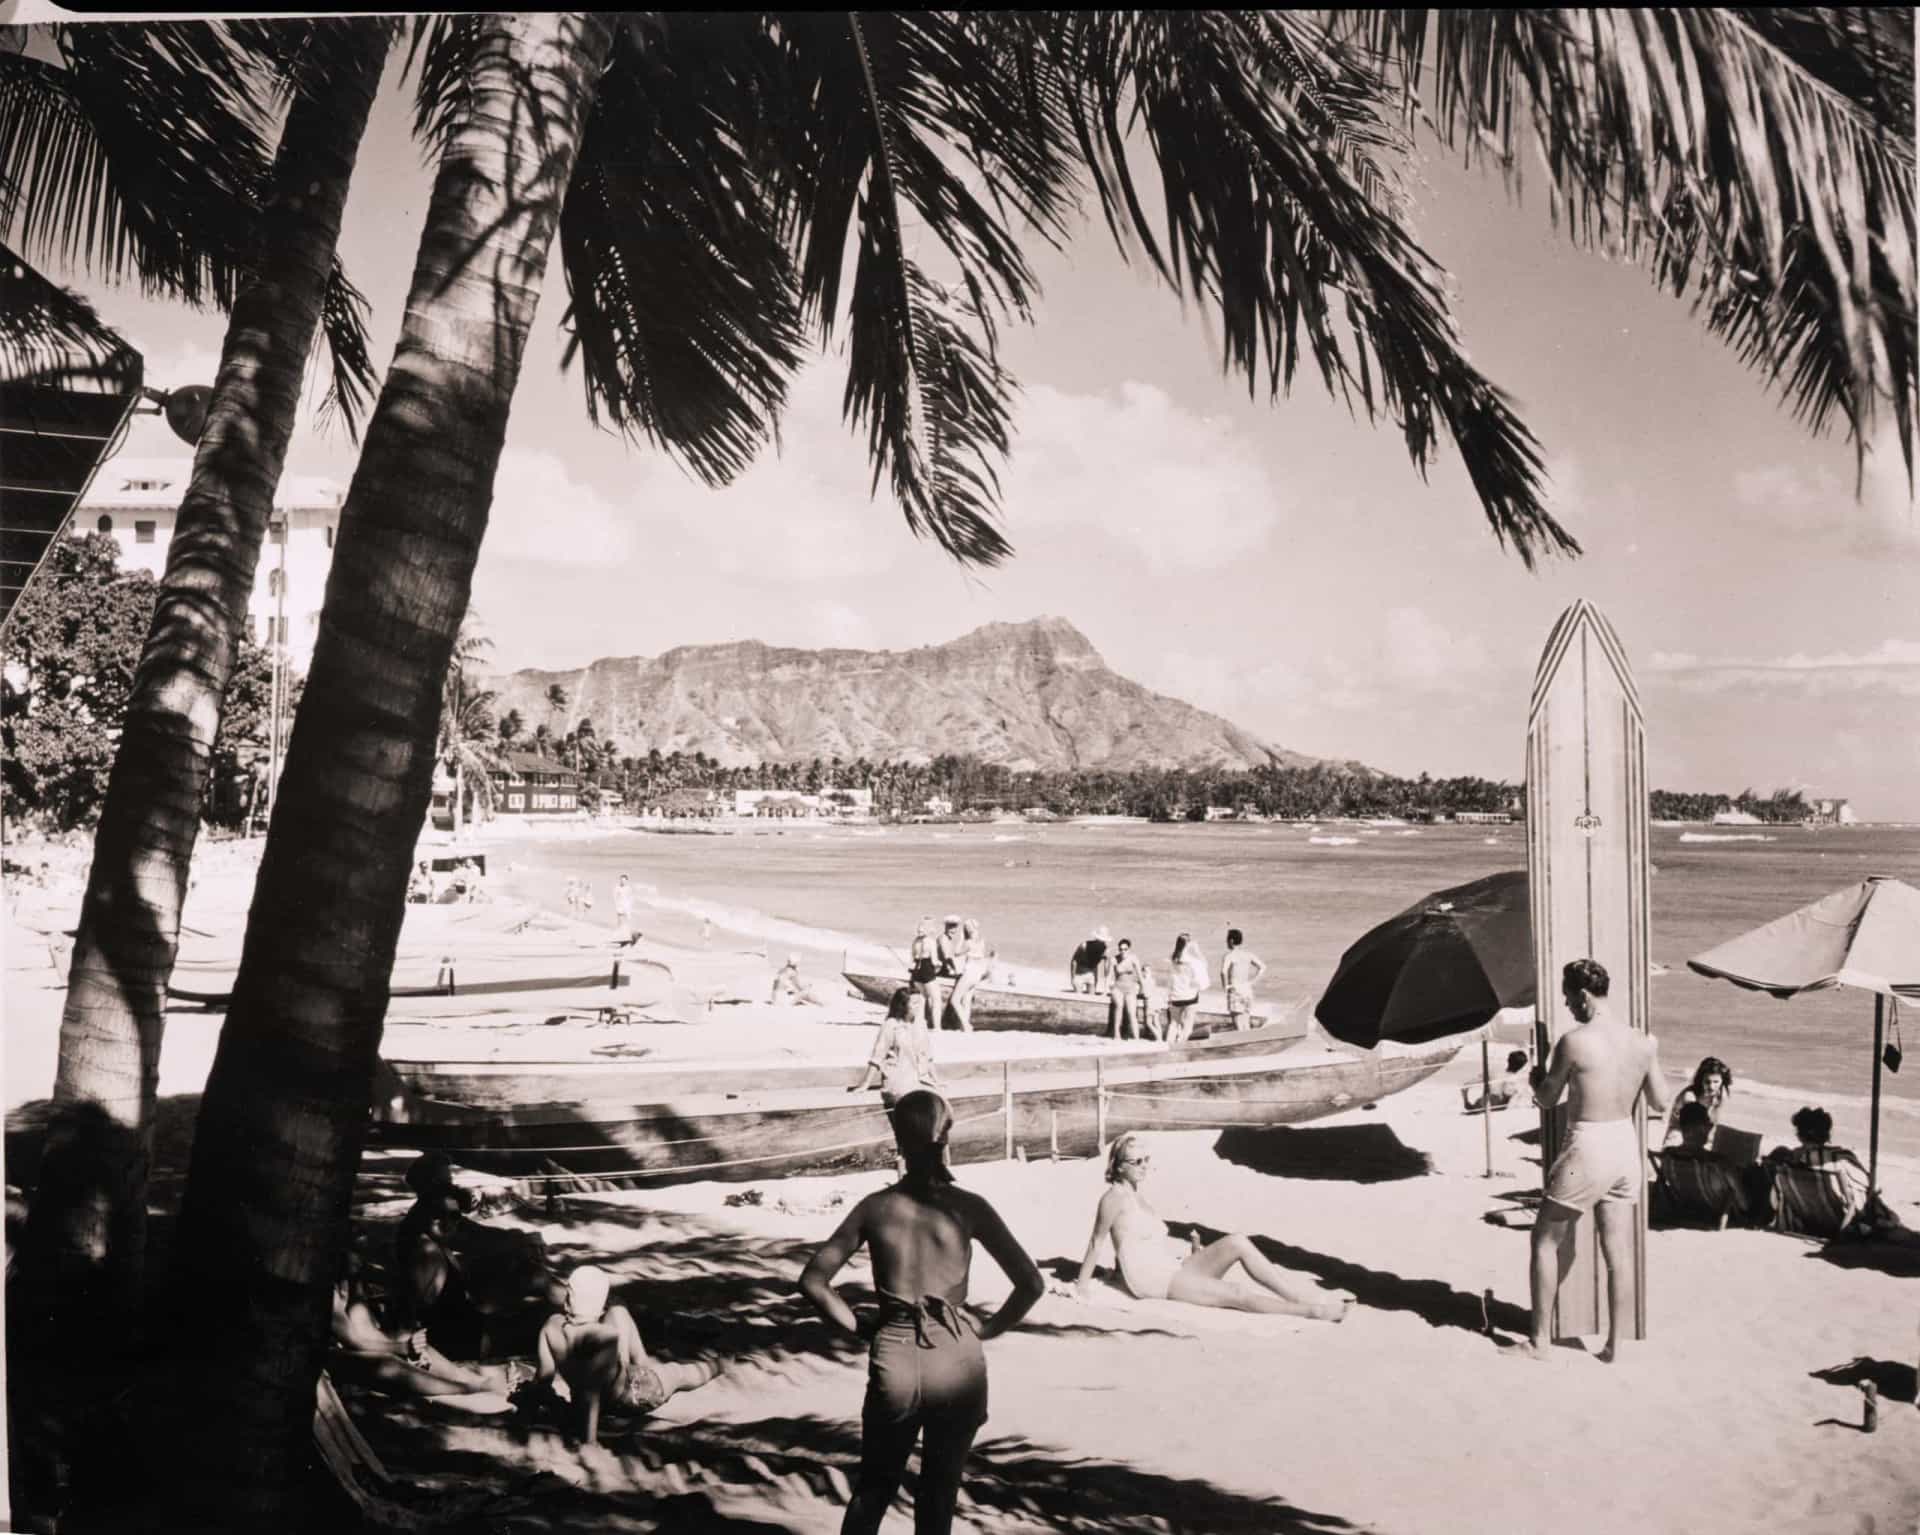 <p>Honolulu was a popular spot in 1950, especially for those living on the West Coast. Gorgeous beaches and iconic places such as the Moana Hotel made this city a must-visit destination. This was nine years before Hawaii became a state. </p><p>Sources: (<a href="https://www.countryliving.com/entertaining/g33409086/popular-vacations-when-born/" rel="noopener">Country Living</a>) (<a href="https://www.grunge.com/893029/the-most-popular-vacation-spots-for-americans-the-year-you-were-born/" rel="noopener">Grunge</a>)</p><p>See also: <a href="https://www.starsinsider.com/celebrity/362762/which-song-was-on-the-top-of-the-charts-when-you-were-born">Which song was on the top of the charts when you were born?</a></p>